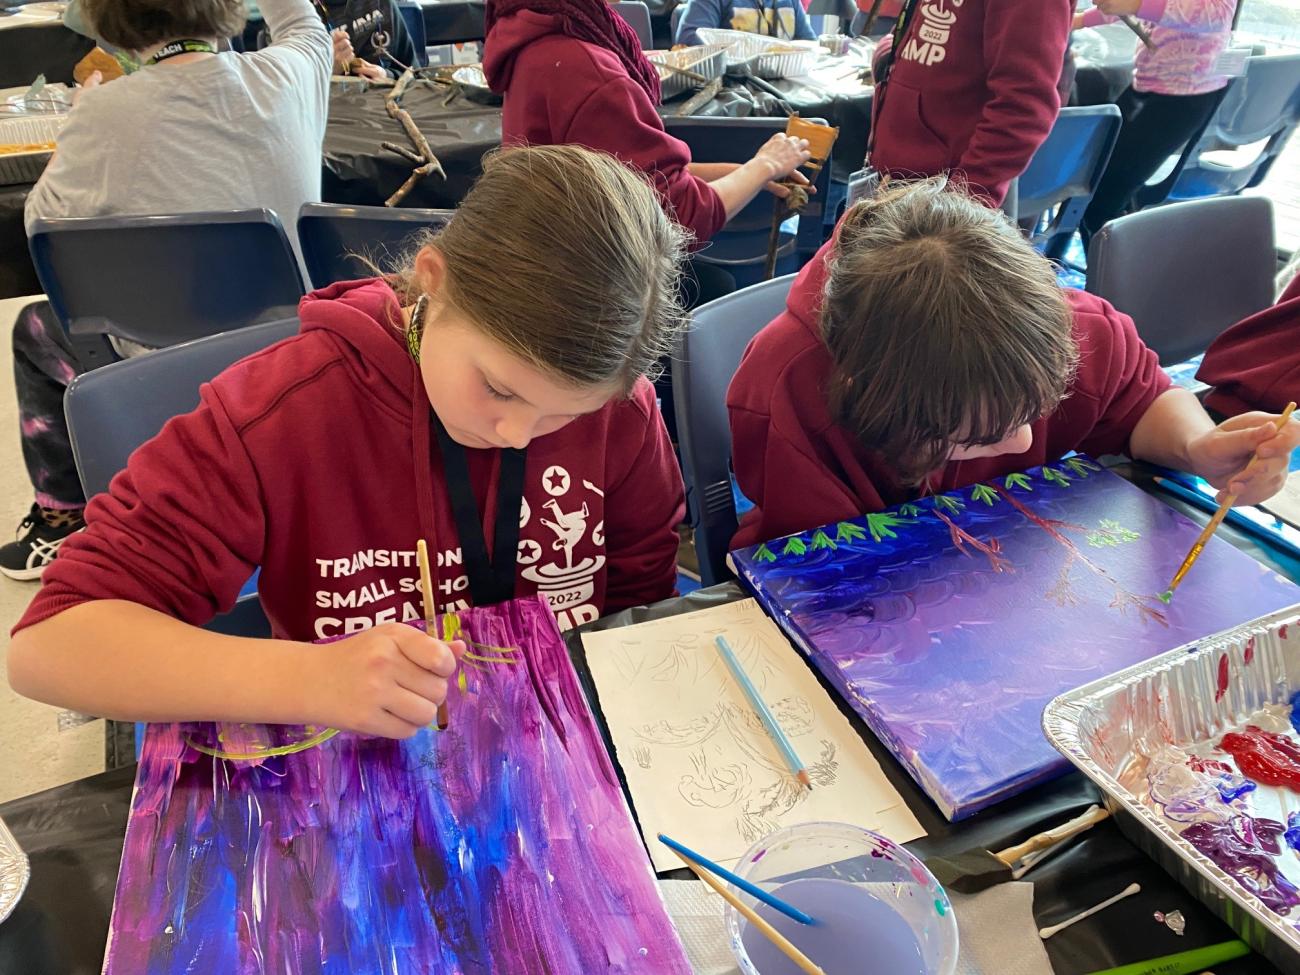 2 students painting on canvases in shades of purple and blue